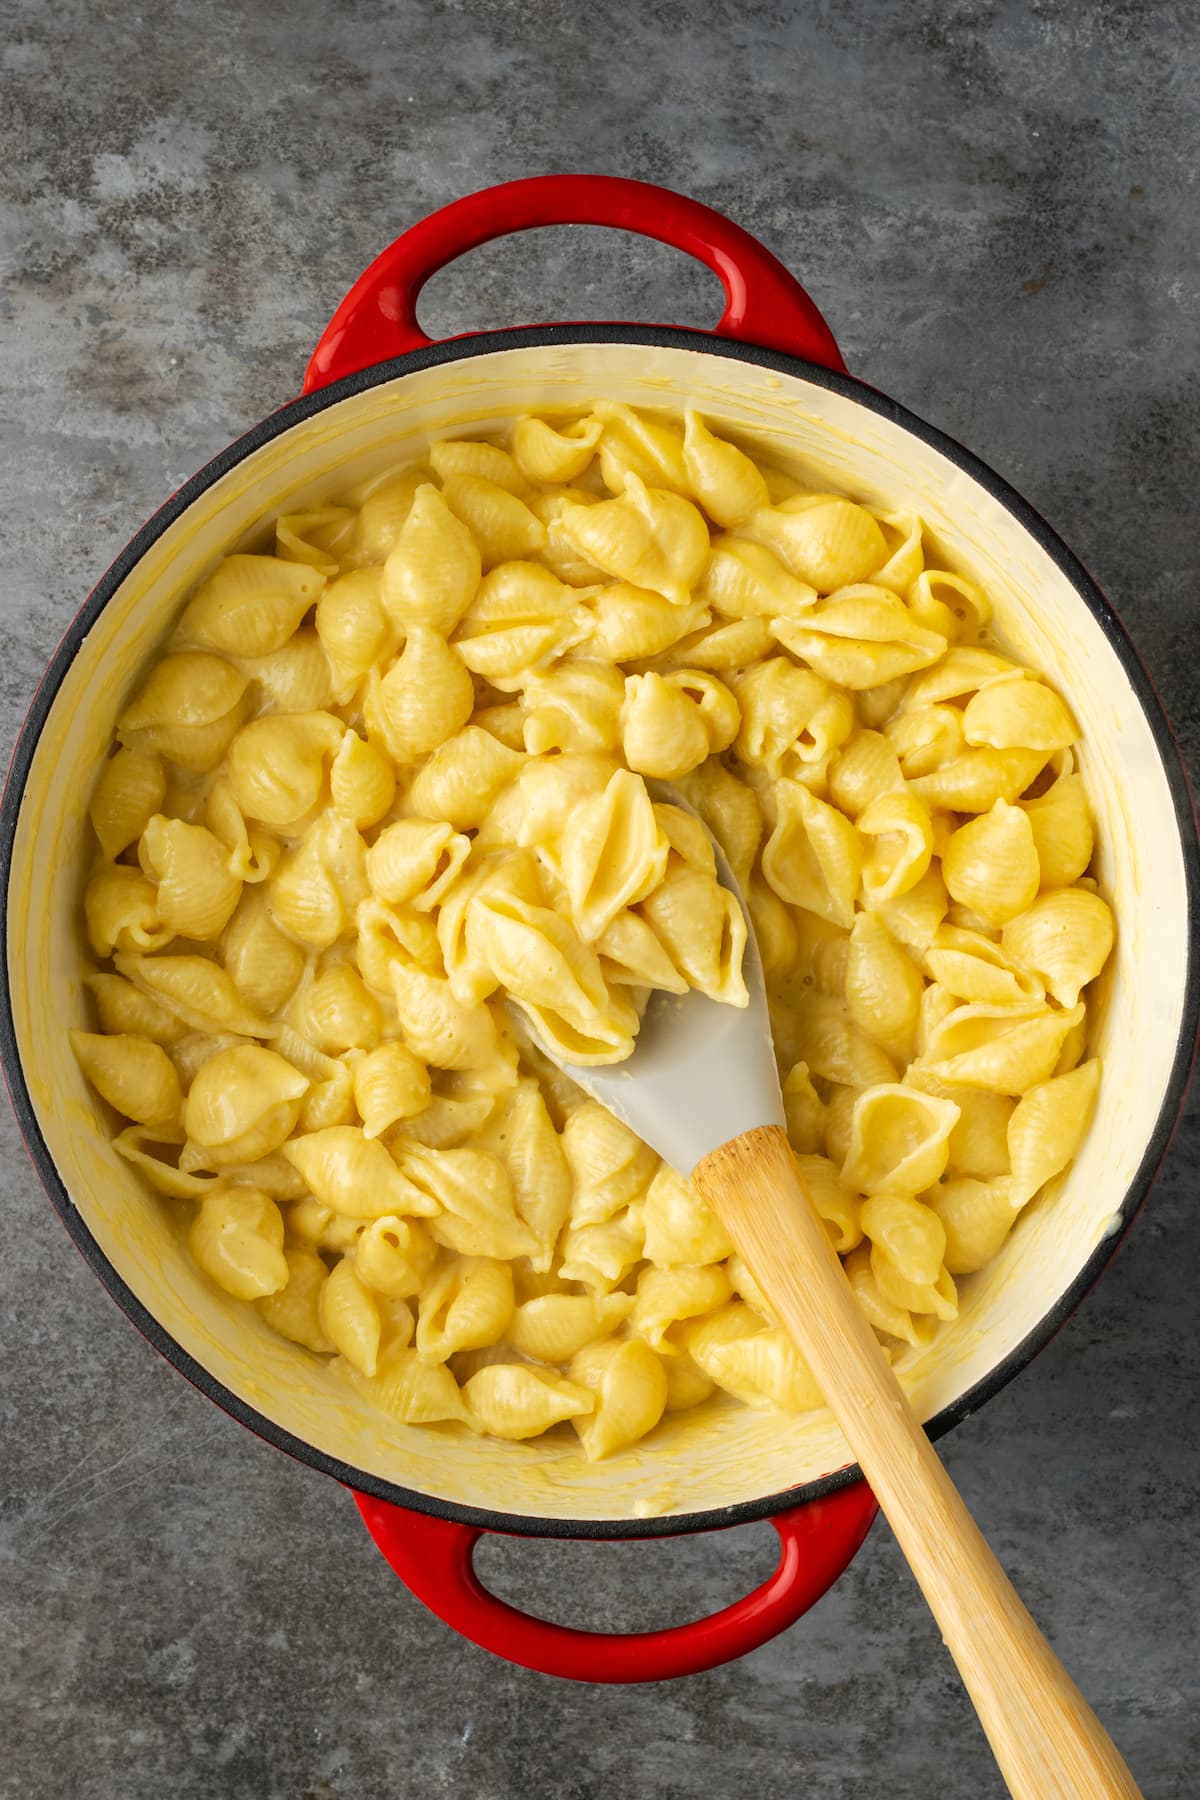 Stir the shell pasta with the cheese sauce in a large pot with a spoon.